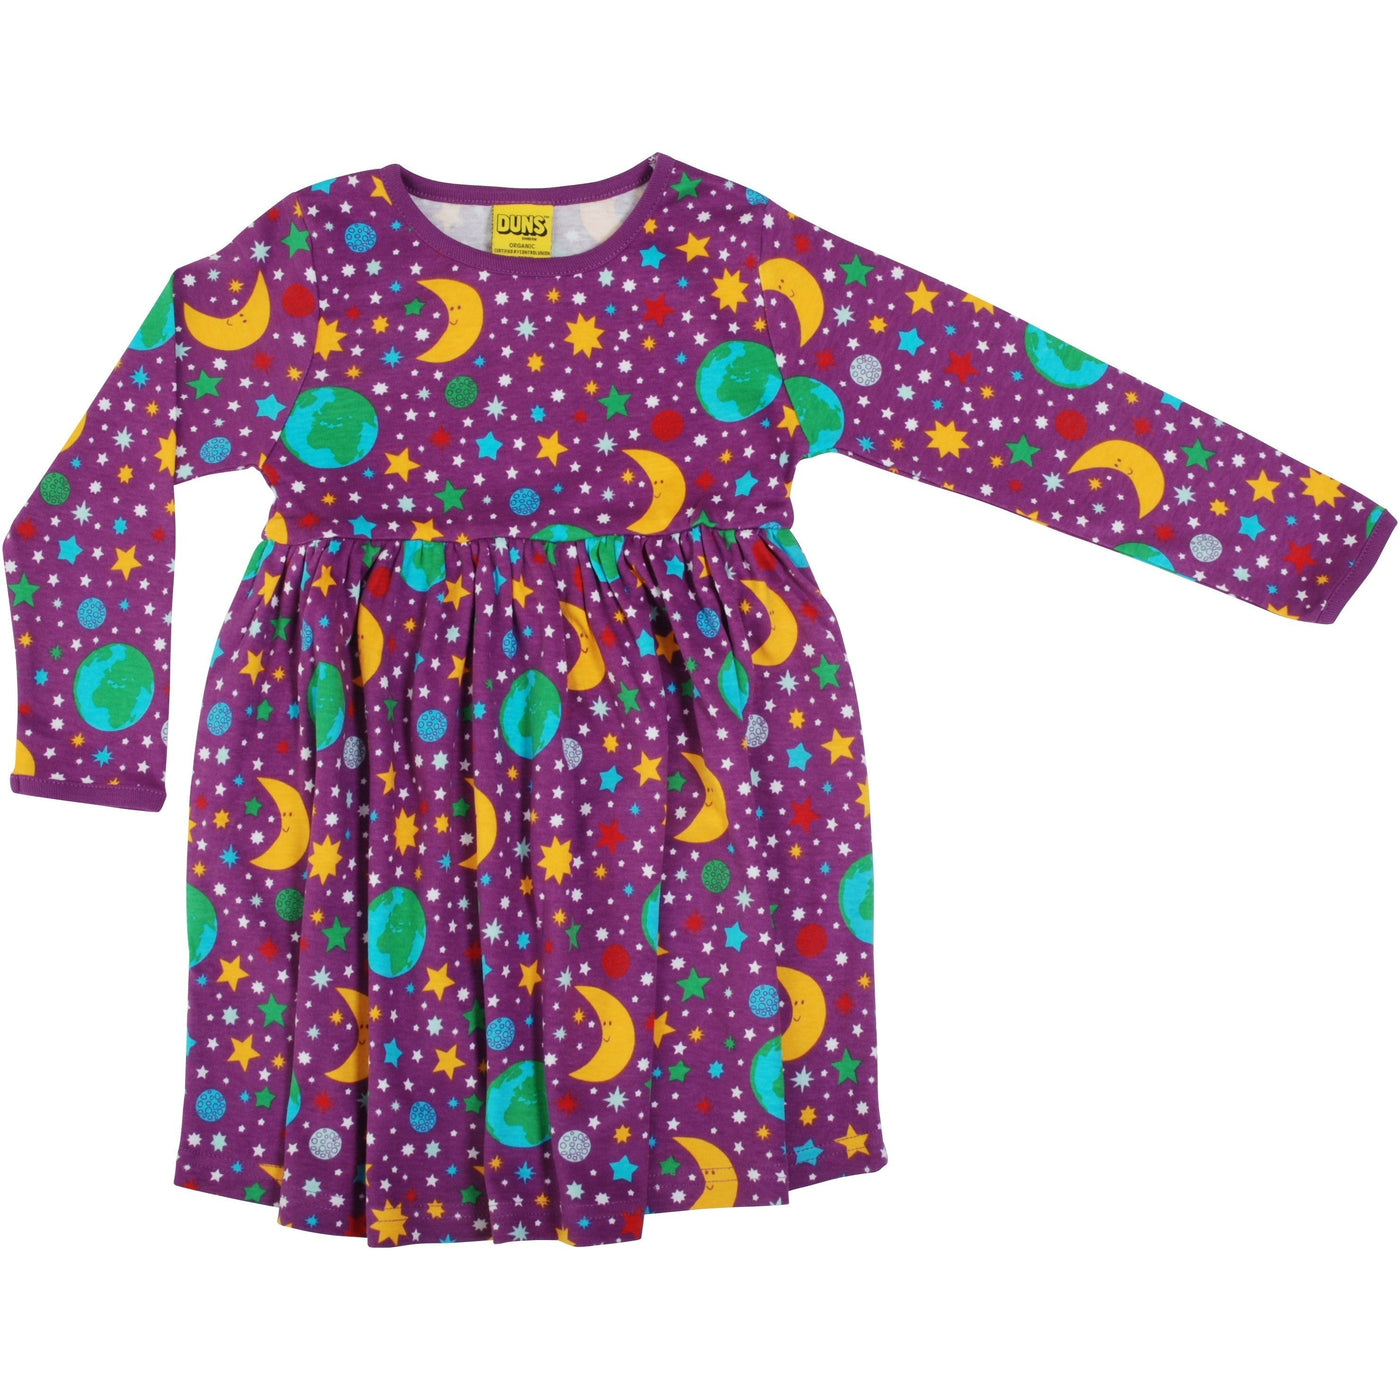 DUNS Long Sleeve Dress with Gather Skirt - Mother Earth Violet